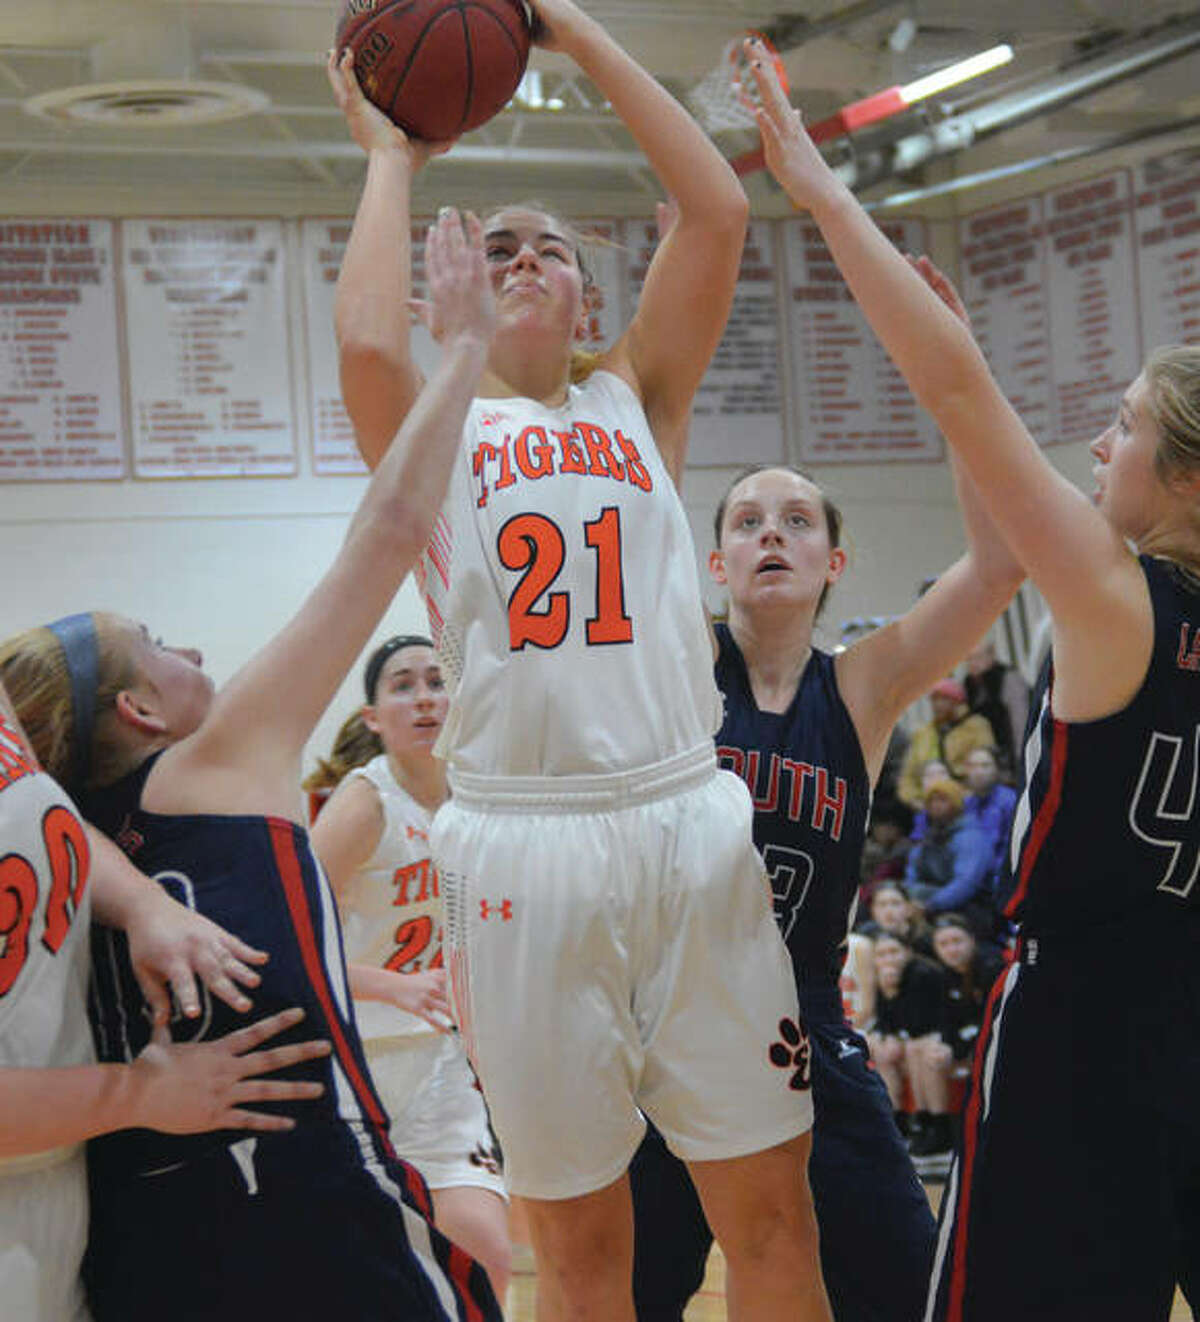 Edwardsville’s Rachel Pranger (21) goes up in traffic for a shot during a first-round game Saturday against Parkway South in the Visitation Tournament in St. Louis. The Tigers were back at Viz on Tuesday and got 16 points in a 61-23 quarterfinal victory over Washington, Mo.